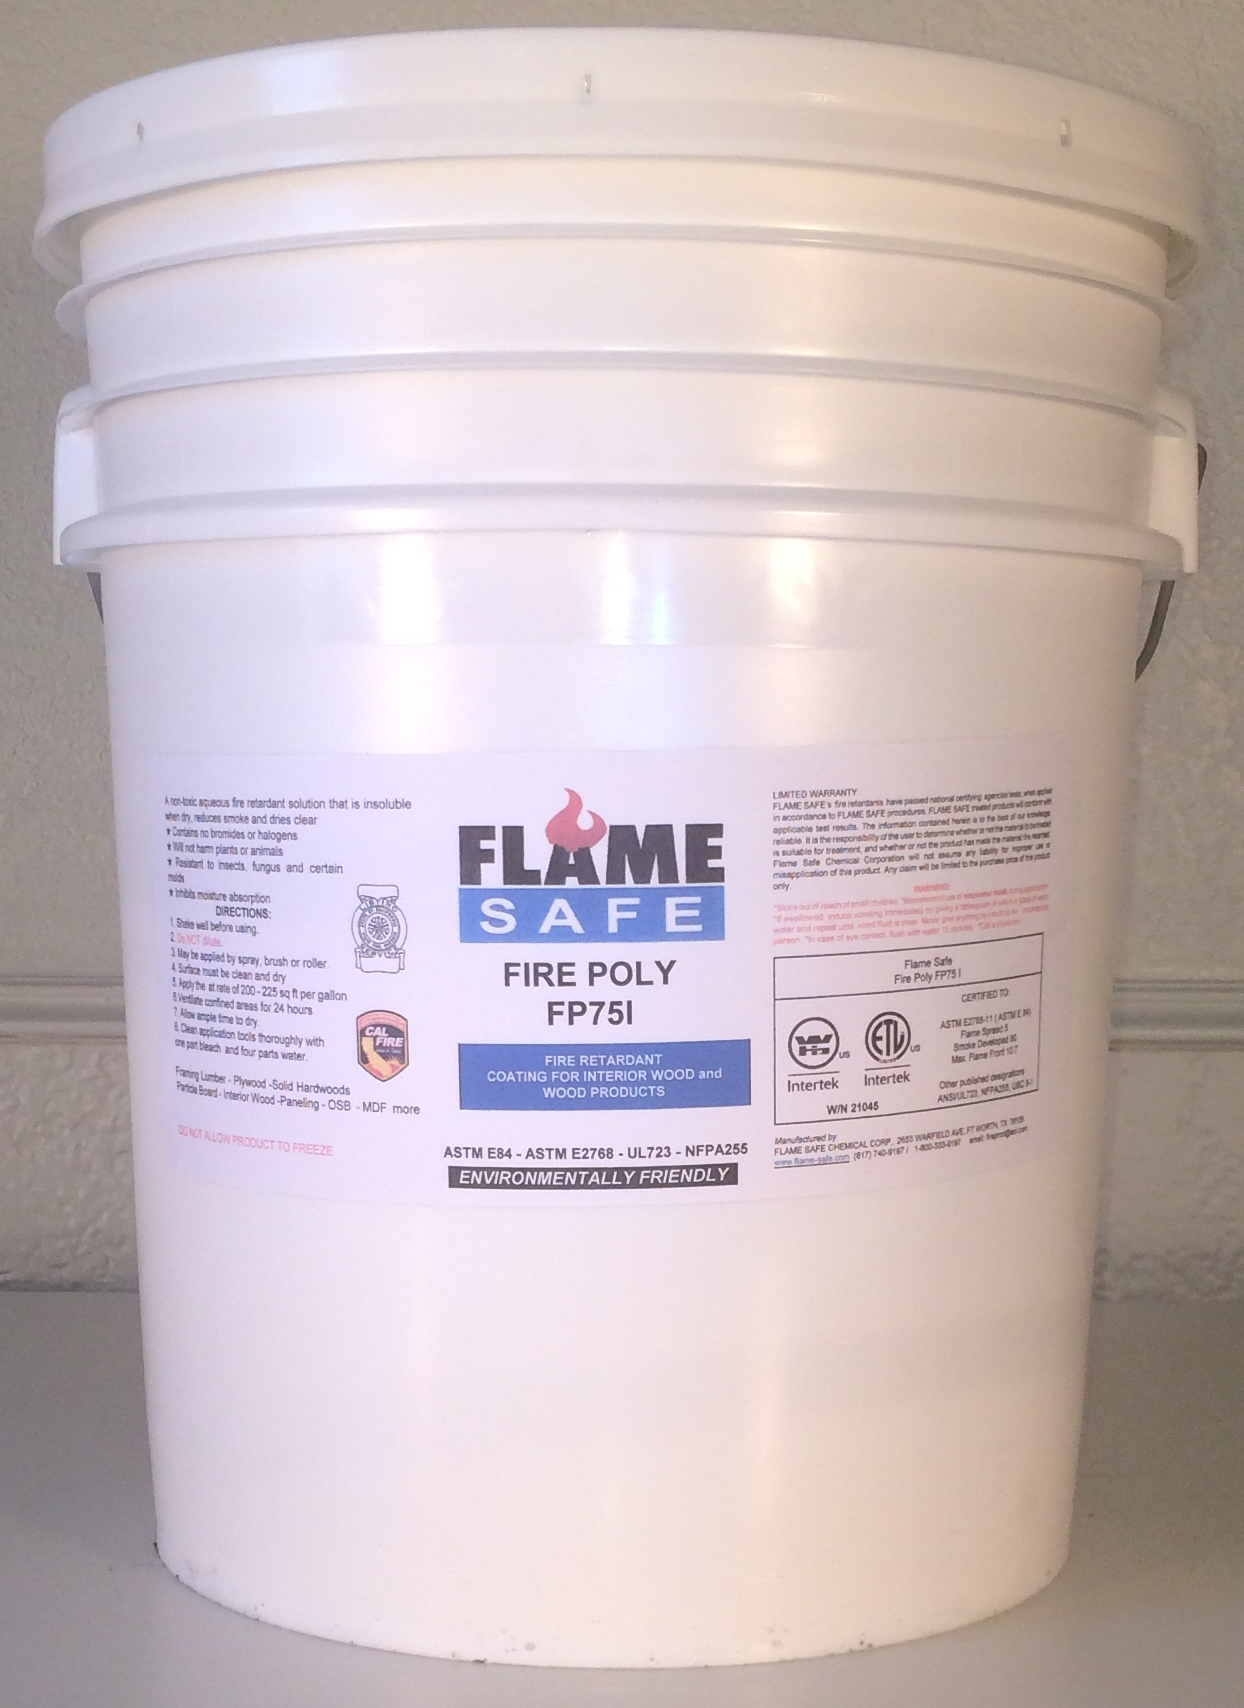 Fire Retardant for Wood Fire Poly FP75I